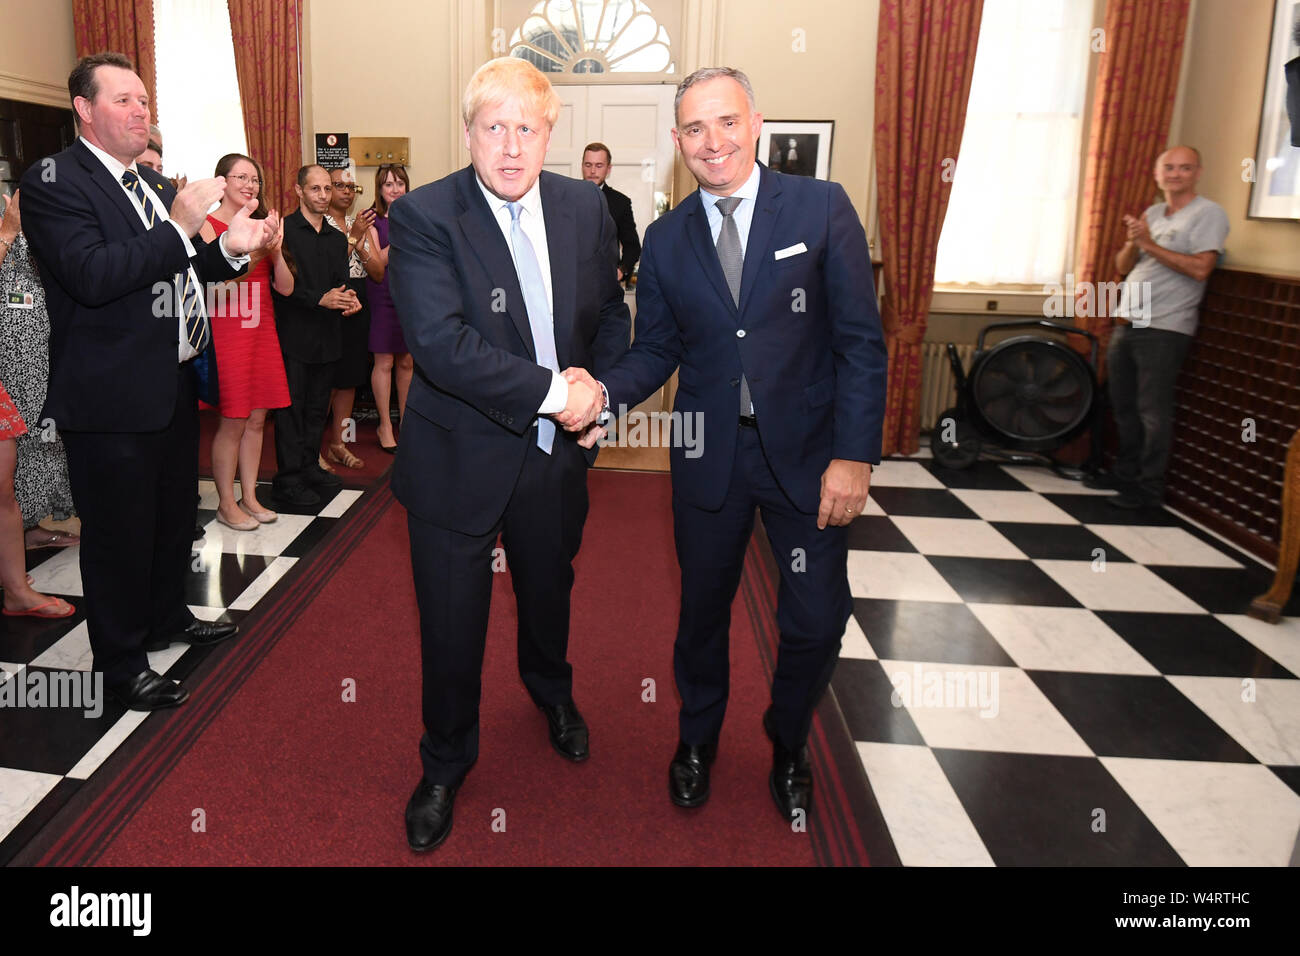 Prime Minister Boris Johnson shaking hands with Sir Mark Sedwill, as he is clapped into 10 Downing Street by Mark Spencer (left) and Dominic Cummings (right) after he accepted the invitation from Queen Elizabeth II to become Prime Minister and form a new government. 24/07/19 Stock Photo